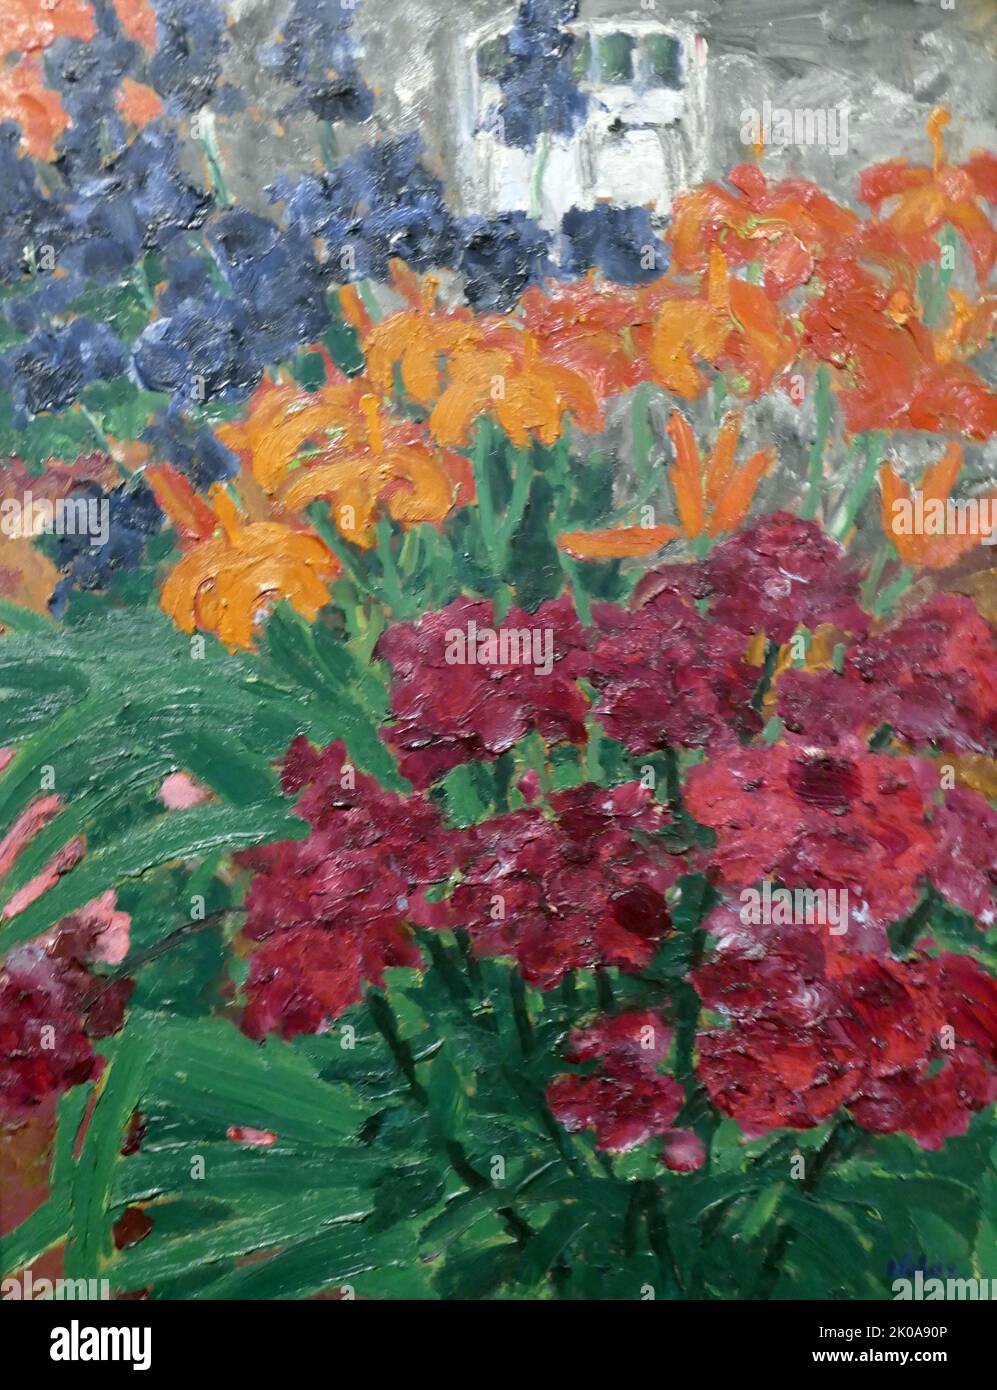 Flower Garden, 1917, by Emil Nolde. Emil Nolde (born Hans Emil Hansen; 7 August 1867 - 13 April 1956) was a German-Danish painter and printmaker. He was one of the first Expressionists, a member of Die Brucke, and was one of the first oil painting and watercolour painters of the early 20th century to explore colour. Even though his art was included in the Entartete Kunst exhibition of 1937, Nolde was a racist, antisemite and a staunch supporter of Nazi Germany Stock Photo